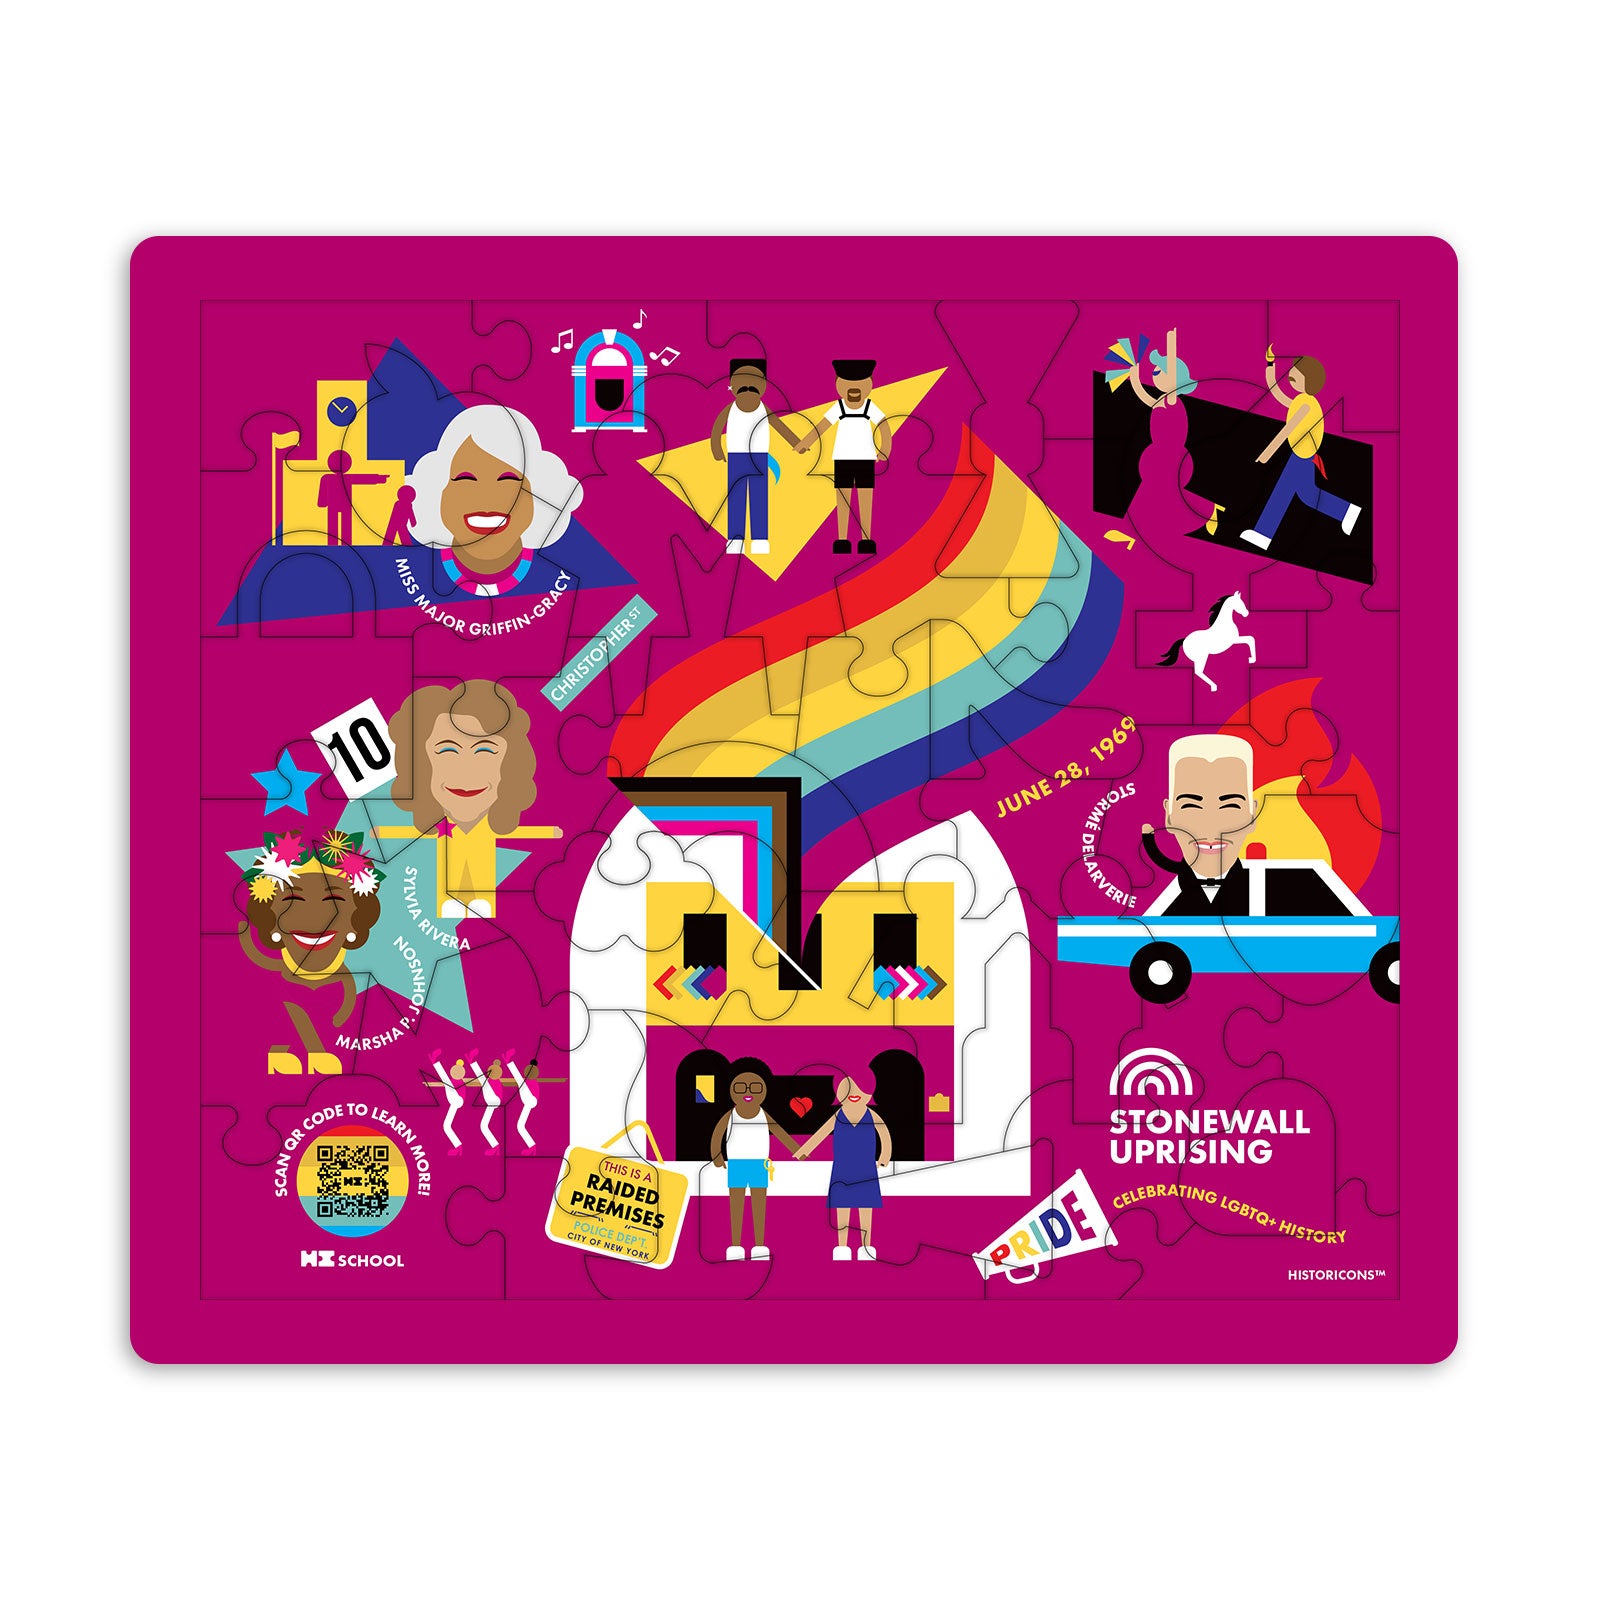 Celebrate LGBTQ+ History with the Historicons Stonewall Uprising children's jigsaw puzzle, pictured here. The puzzle is magenta and features original art with colorful vignettes of the Stonewall Uprising and historic icons who made it happen: including Miss Major Griffin-Gracy, Stormé DeLarverie, Sylvia Rivera, and Marsha P. Johnson. Custom puzzle piece shapes, including puzzle pieces shaped like a bow tie, two women holding hands, and more serve as storytelling guides and discussion prompts.